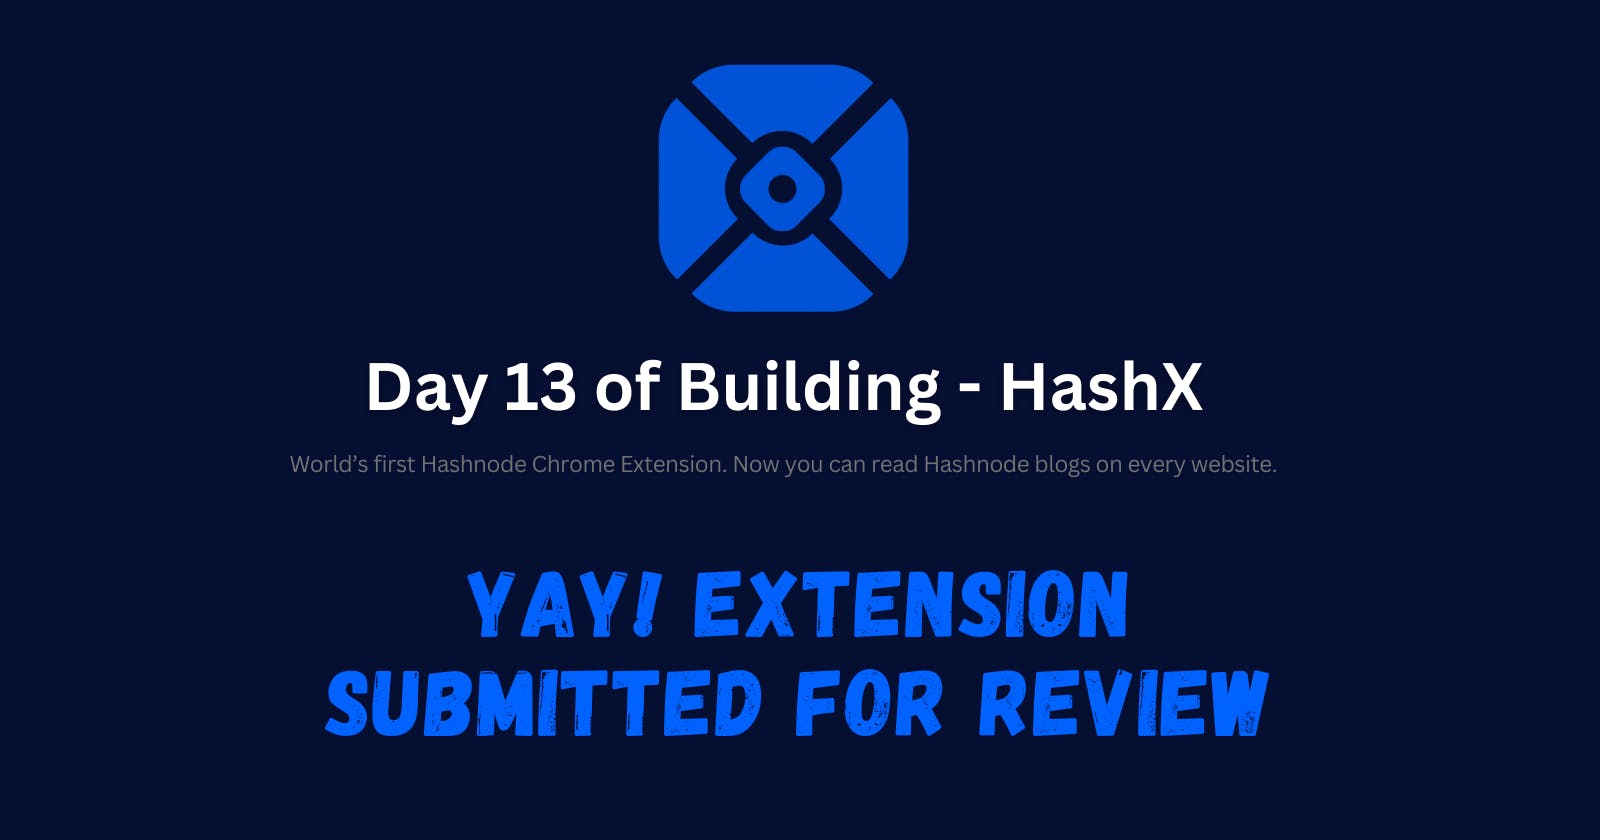 Day 13 - Yay! Extension submitted for review